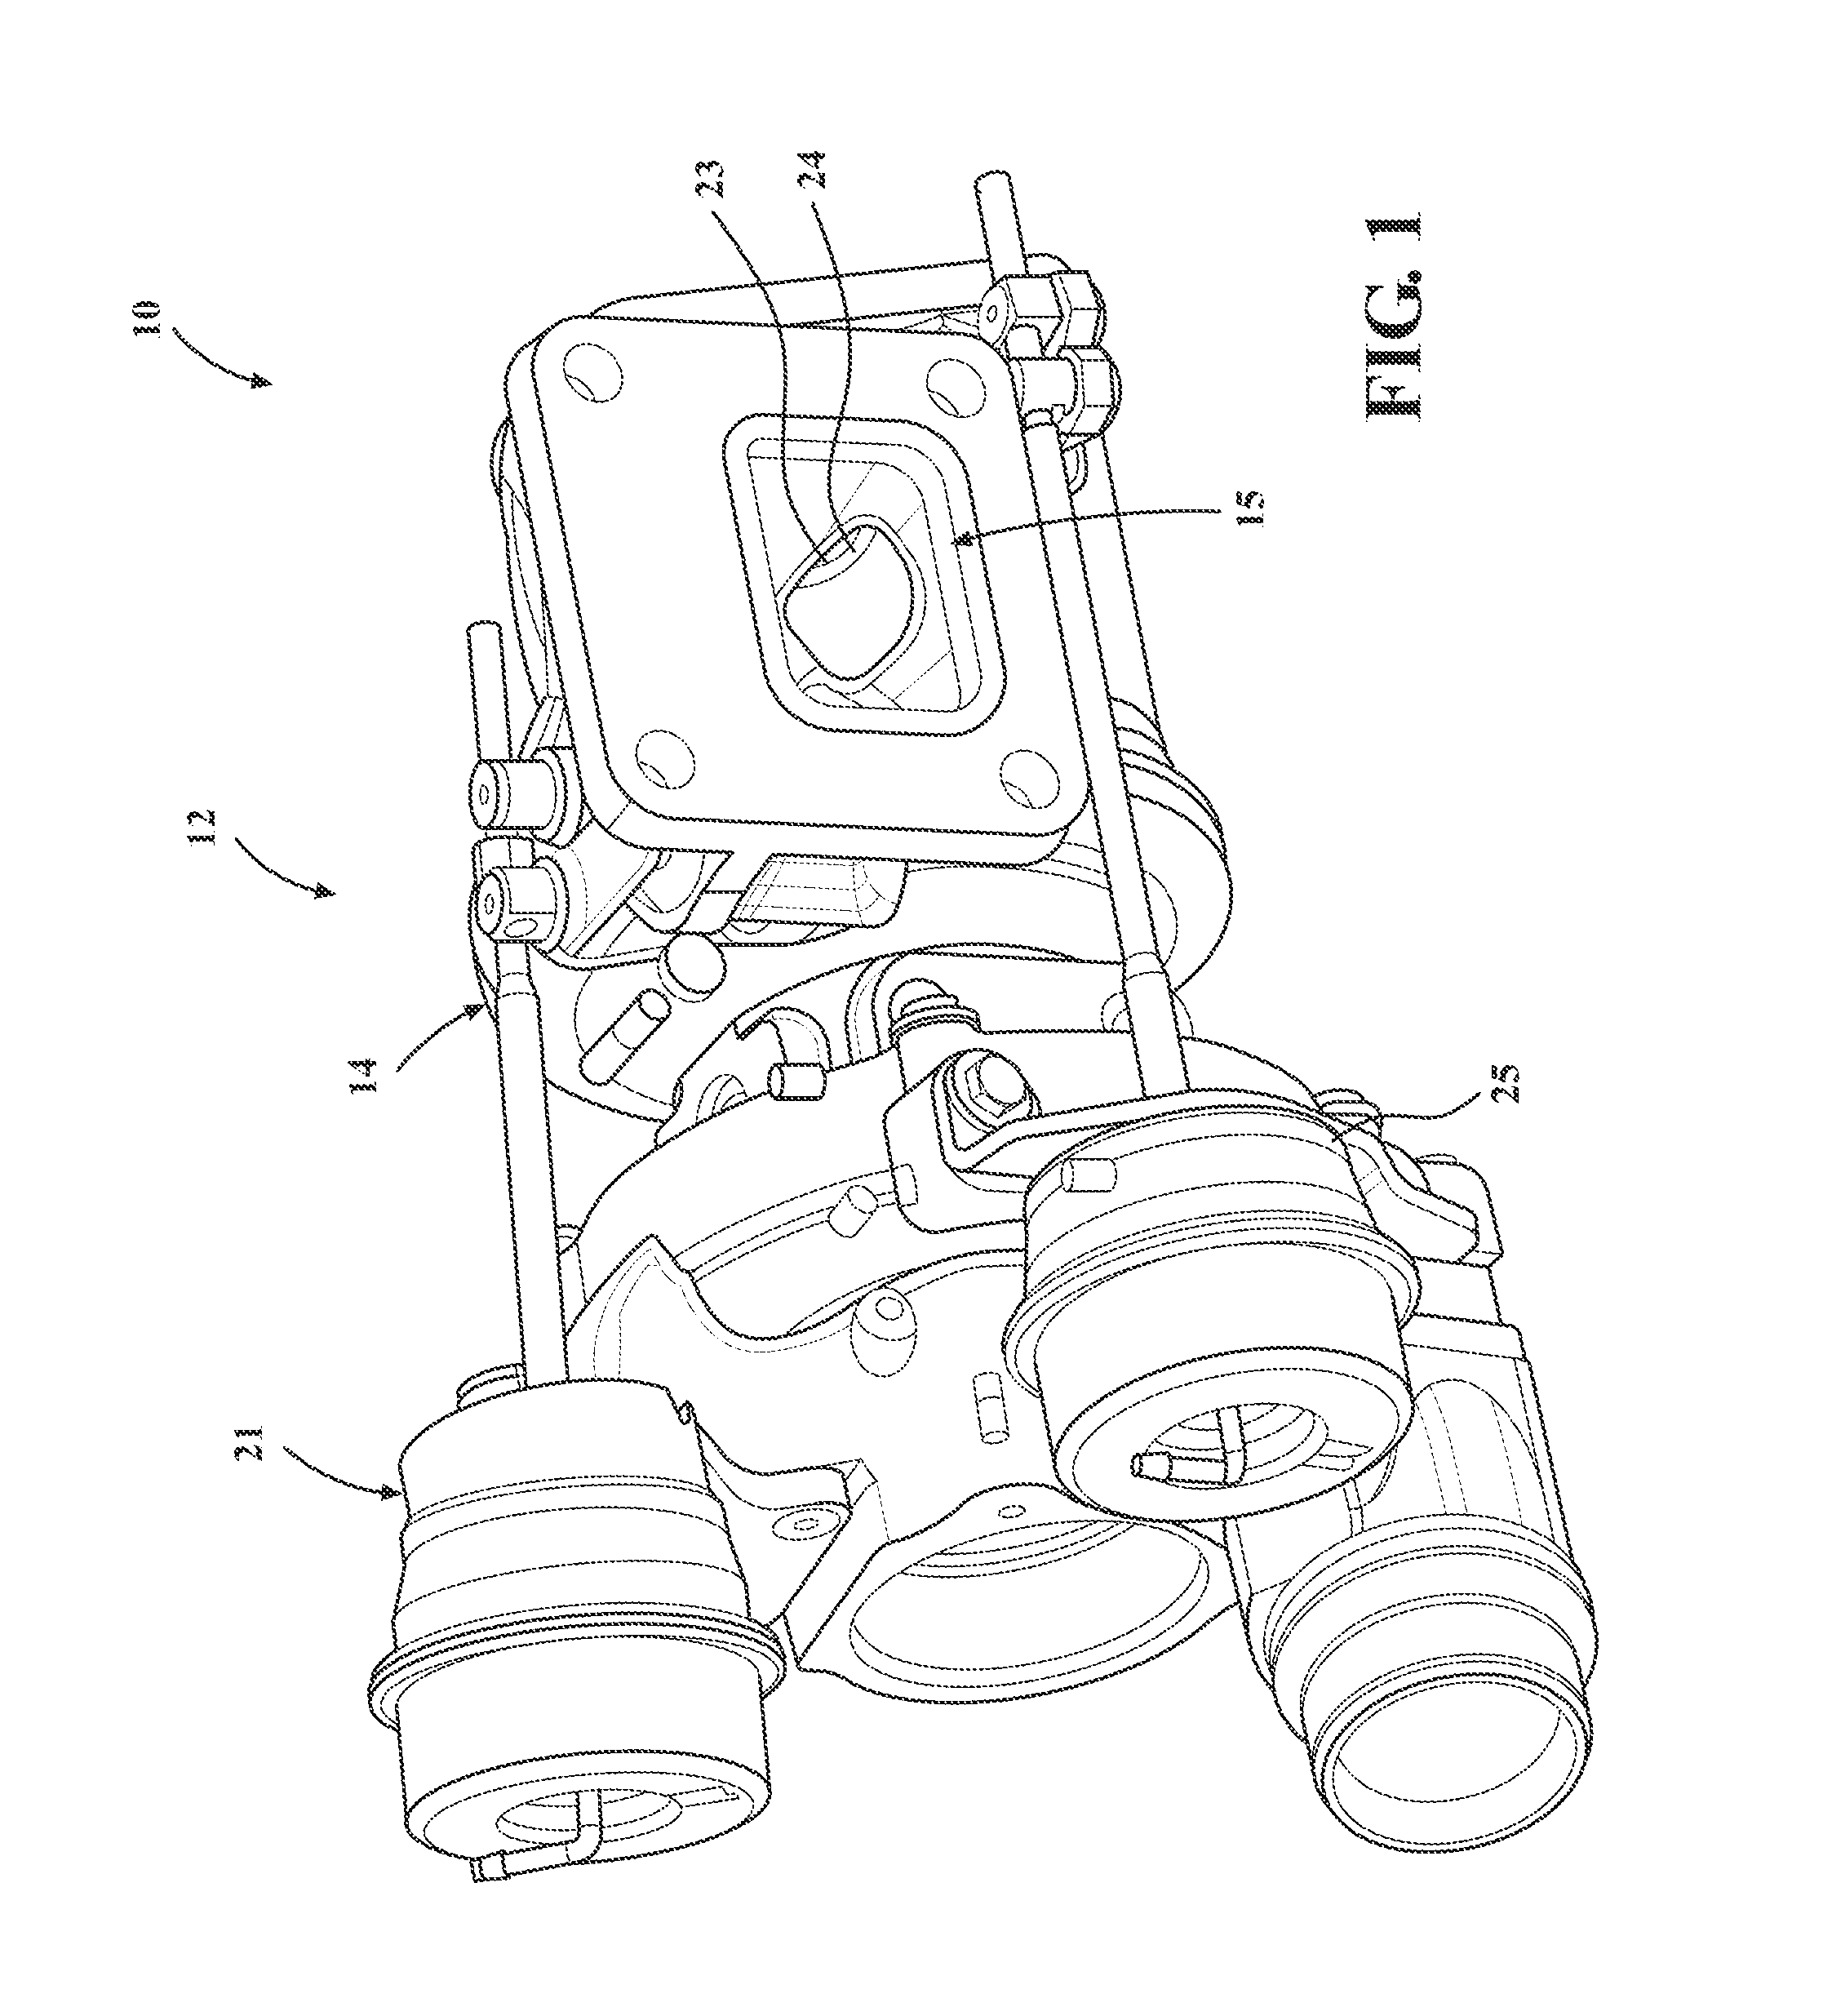 Mixed flow twin scroll turbocharger with single valve